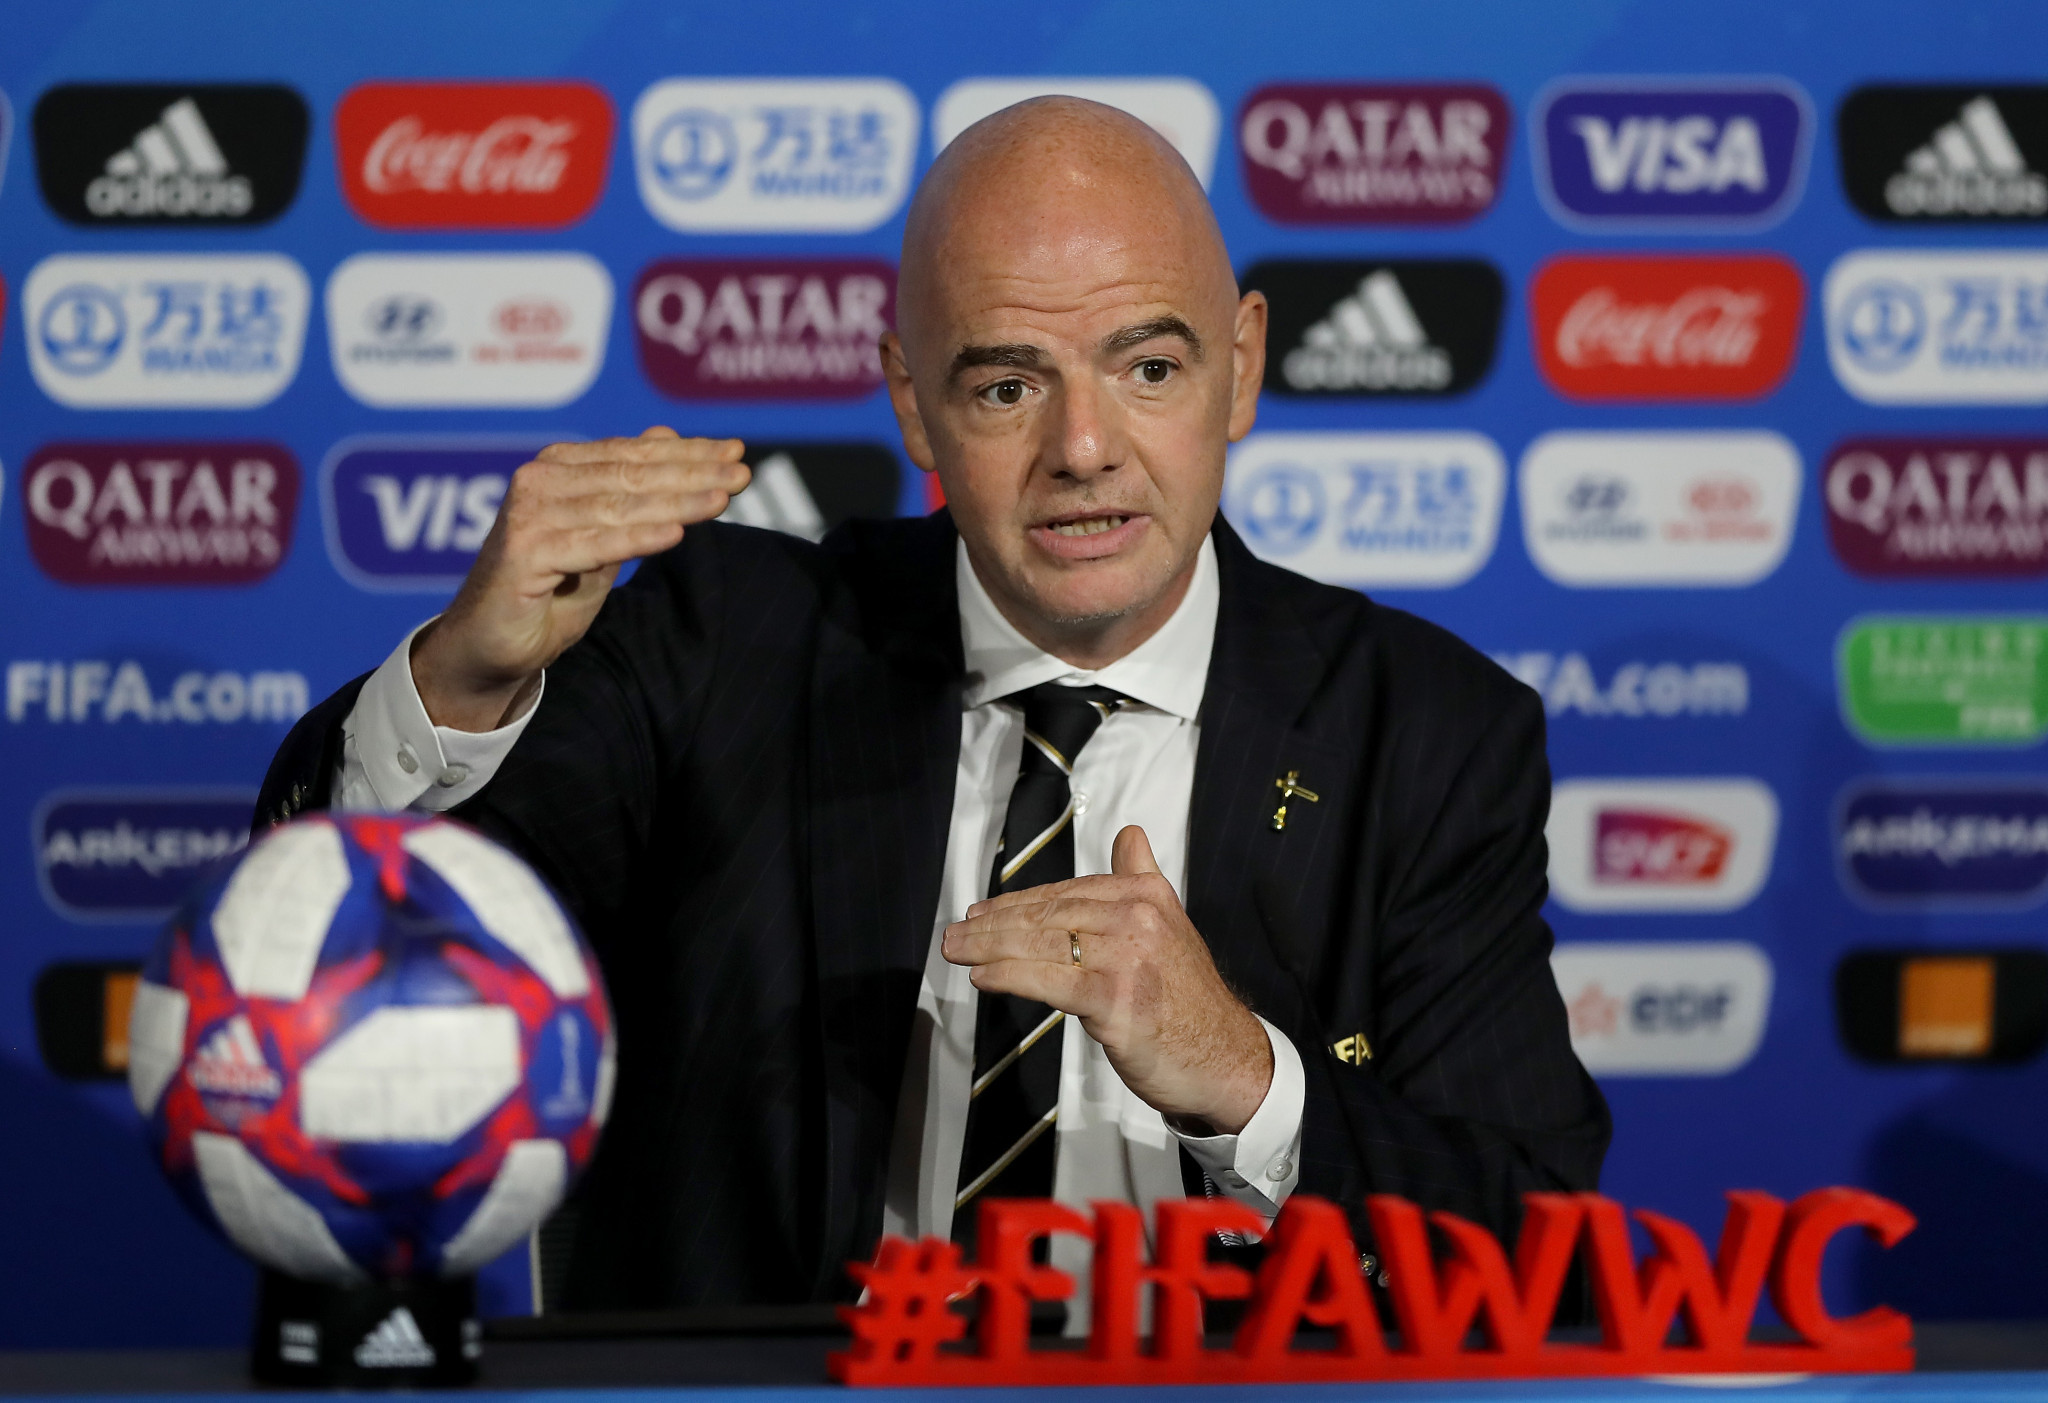 FIFA President Gianni Infantino said he had been encouraged by Qatar 2022's commitment to improving conditions for workers ©Getty Images